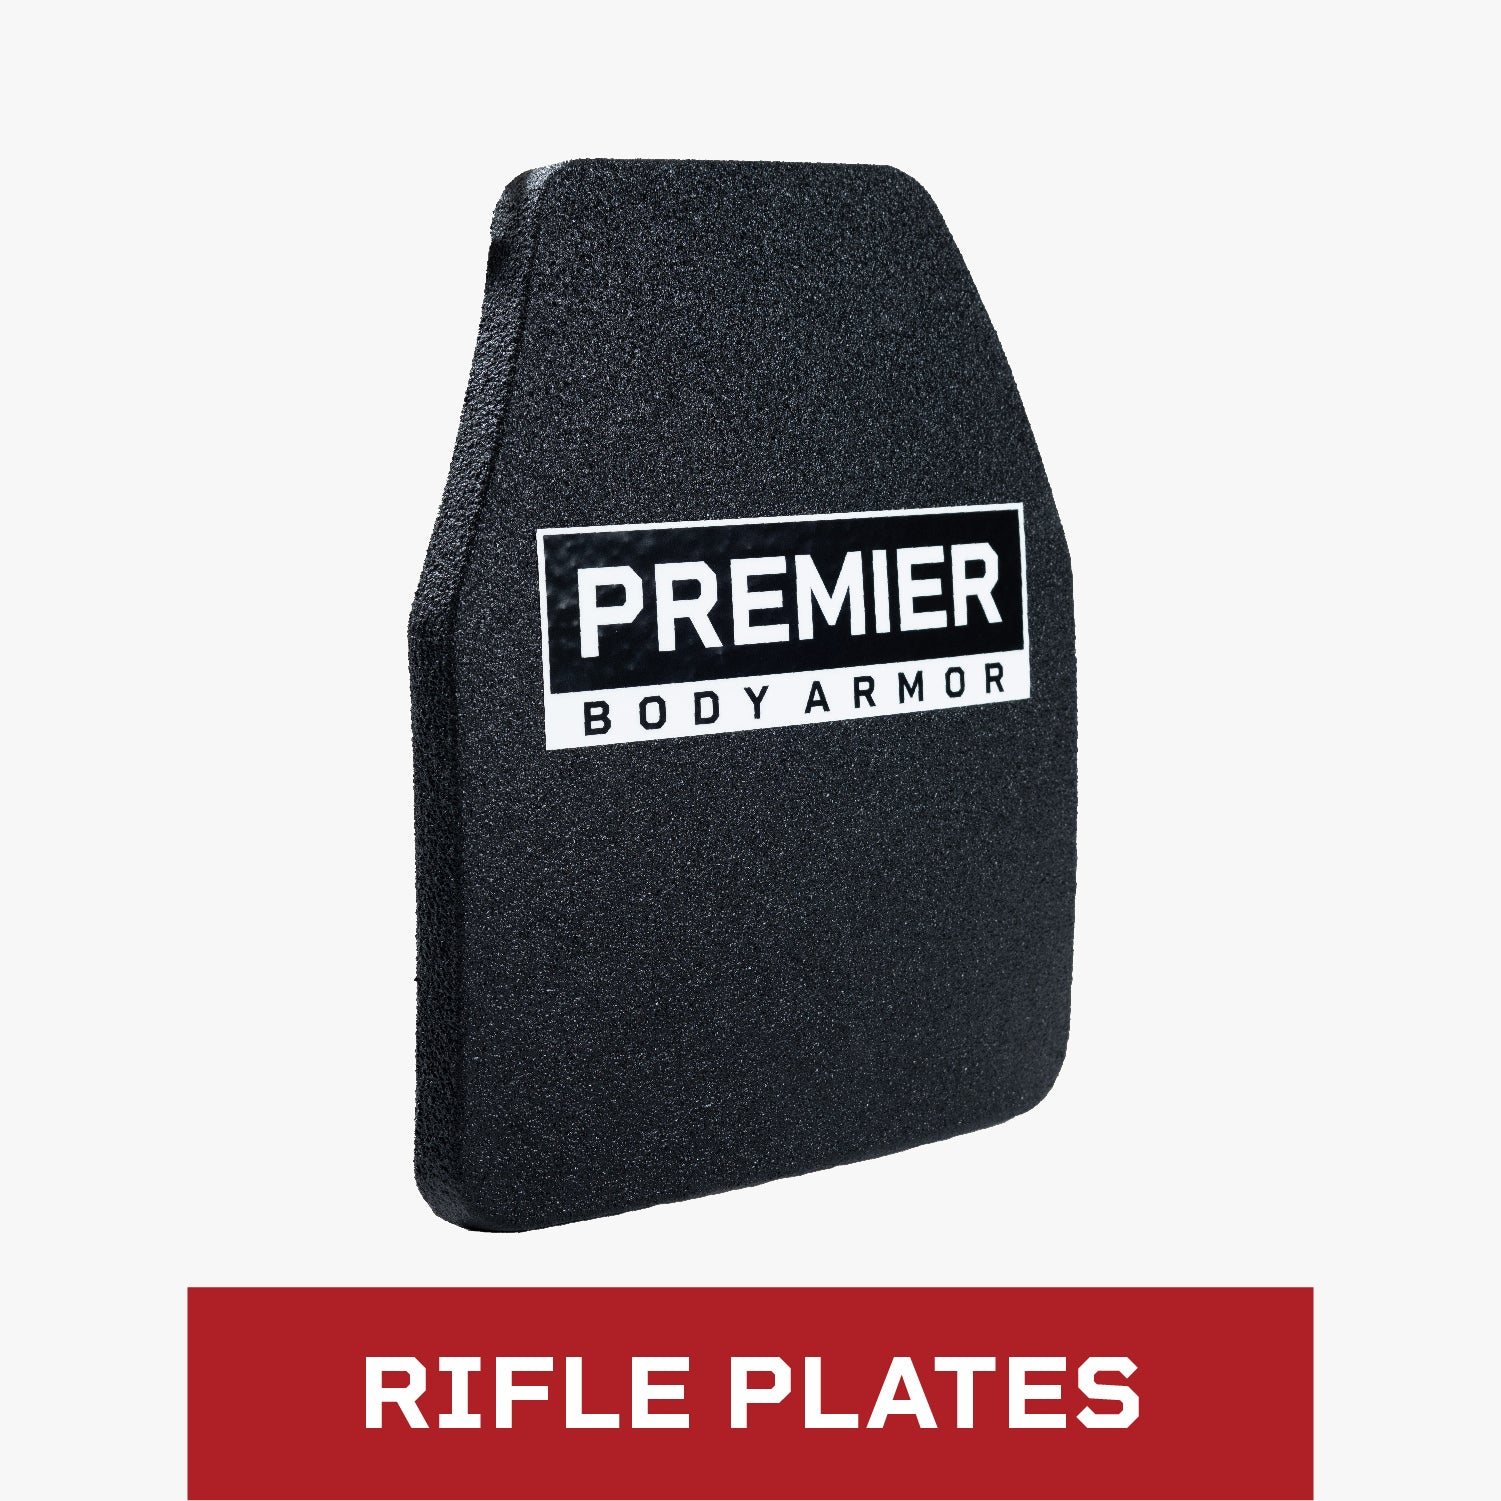 Premier body armor company uses UHMWPE to make lightweight armor for bullet proof vests with plates. Get the best carrier plates for rifle rated protection. NIJ Certified plates for your tactical vests. Level 3 and Level 4 body armor.